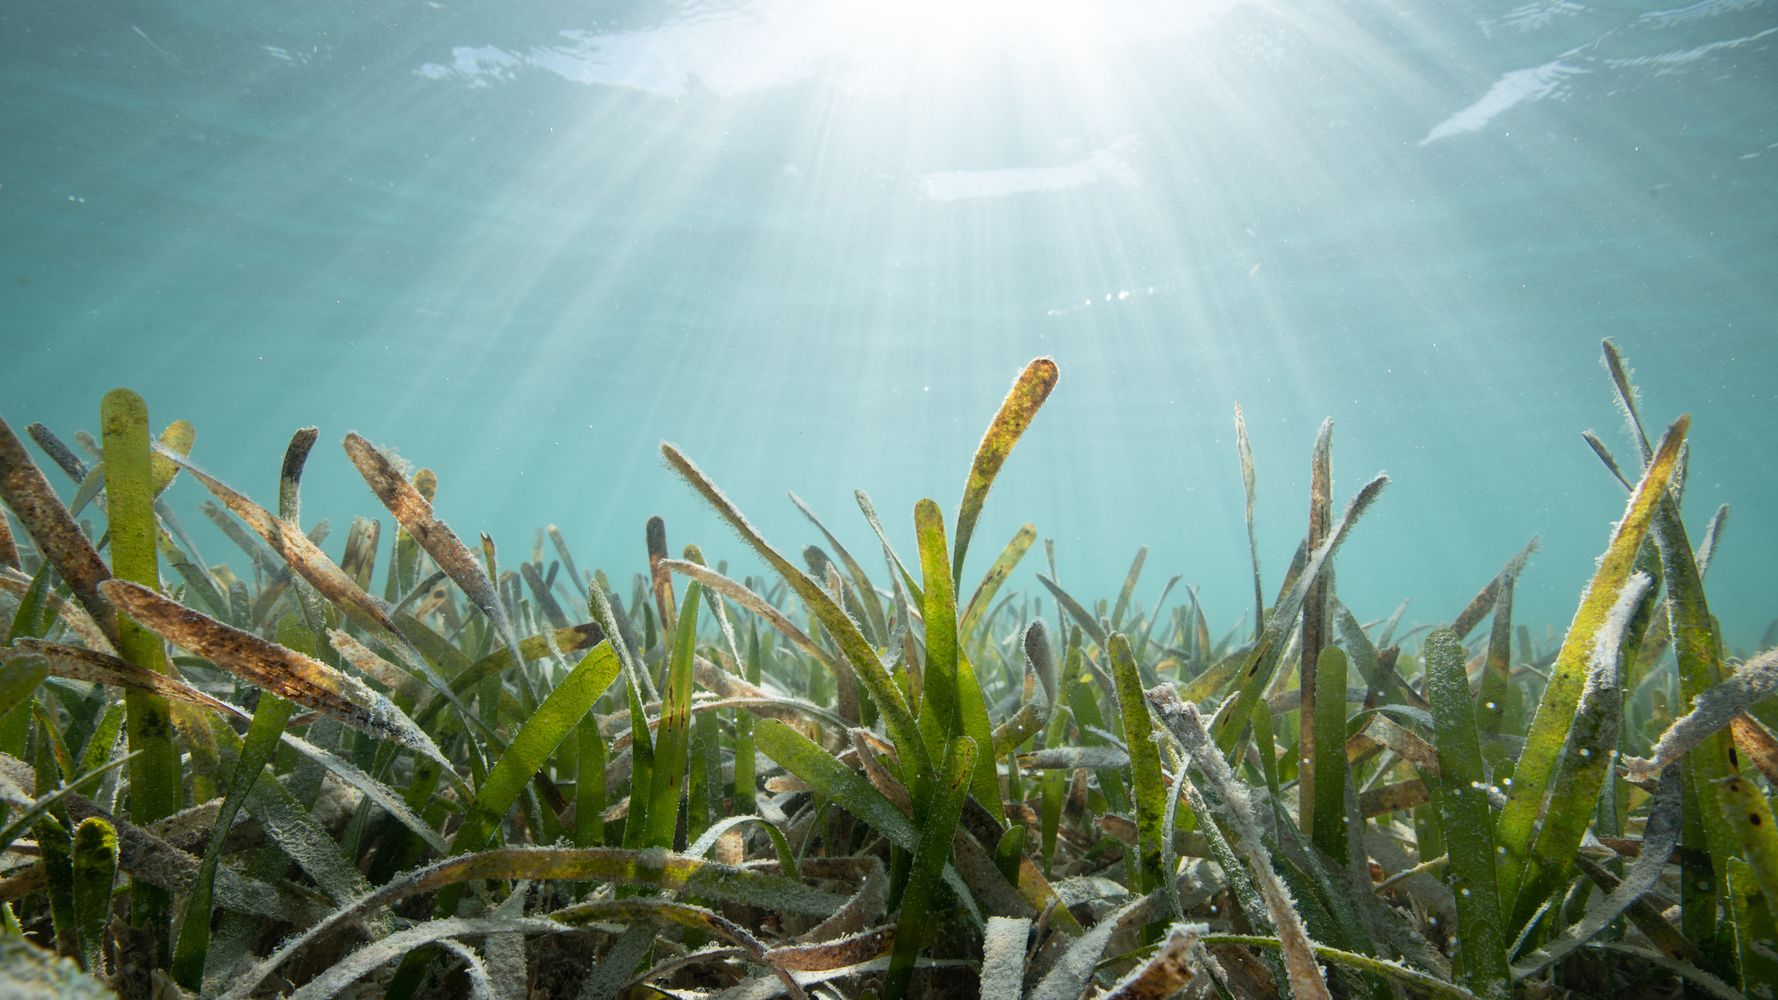 Could human pee save seagrass?